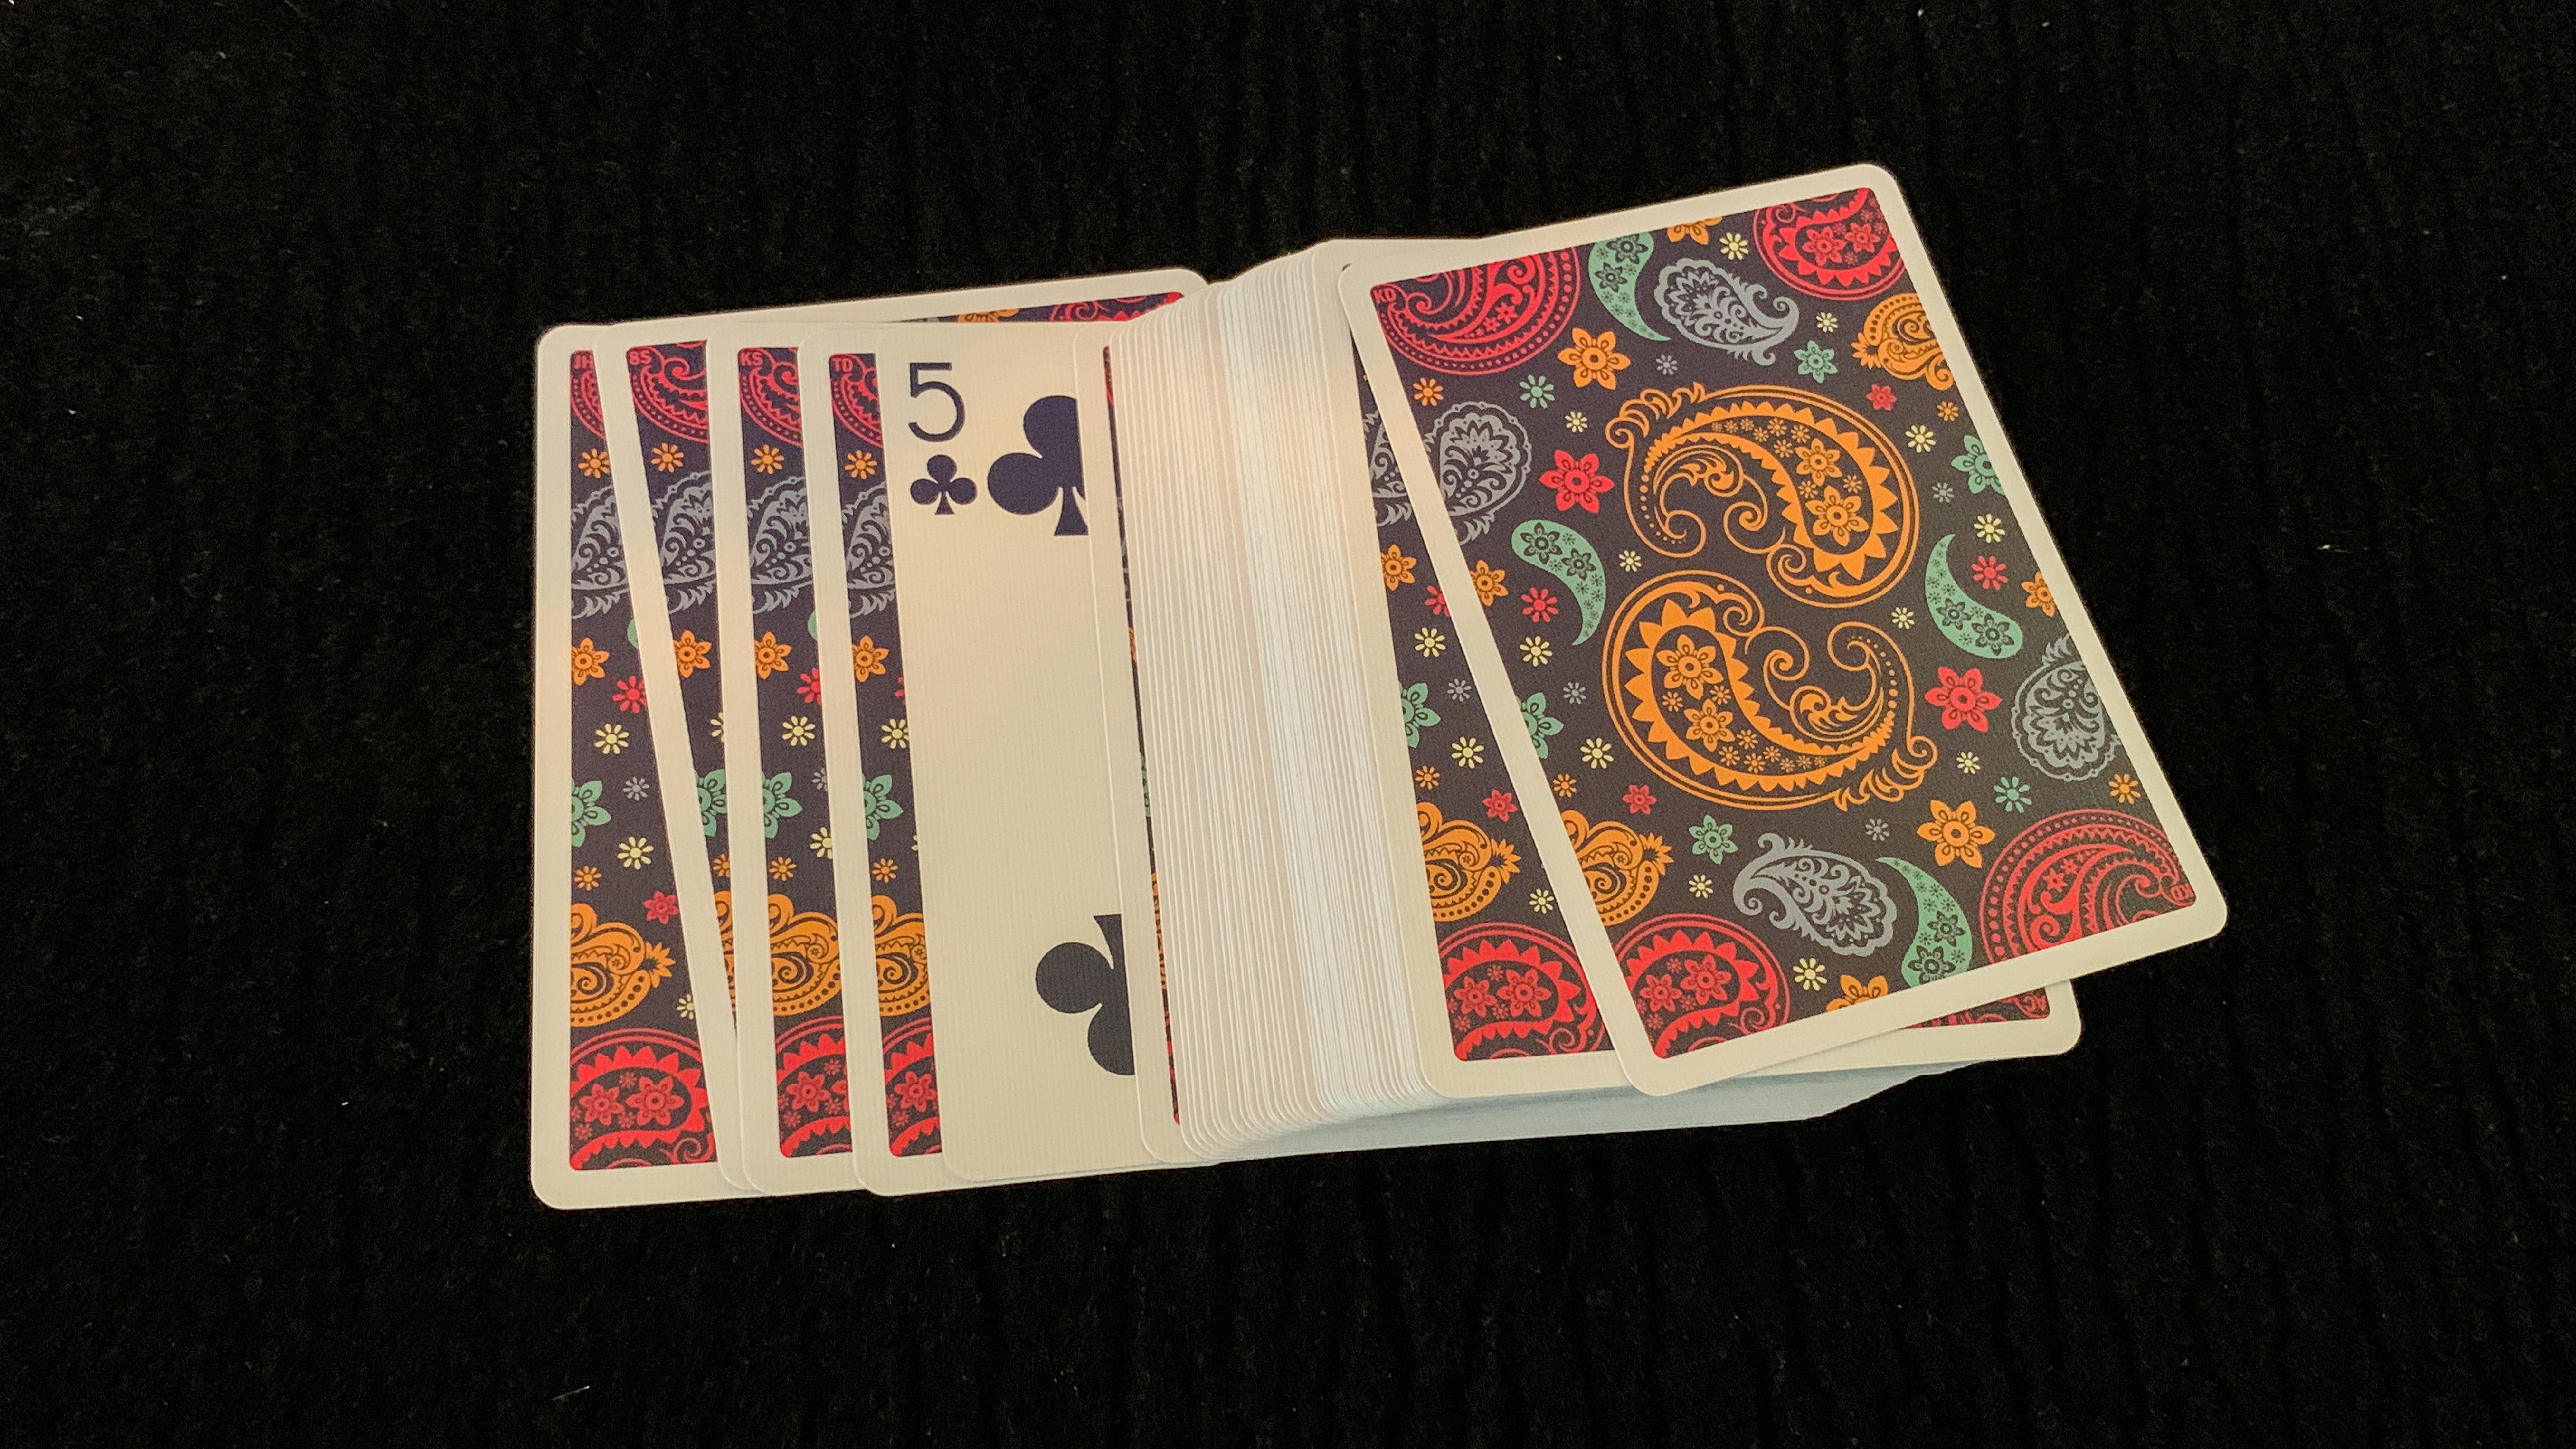 5 of Clubs peeks out of a face down card spread of dapper deck playing cards